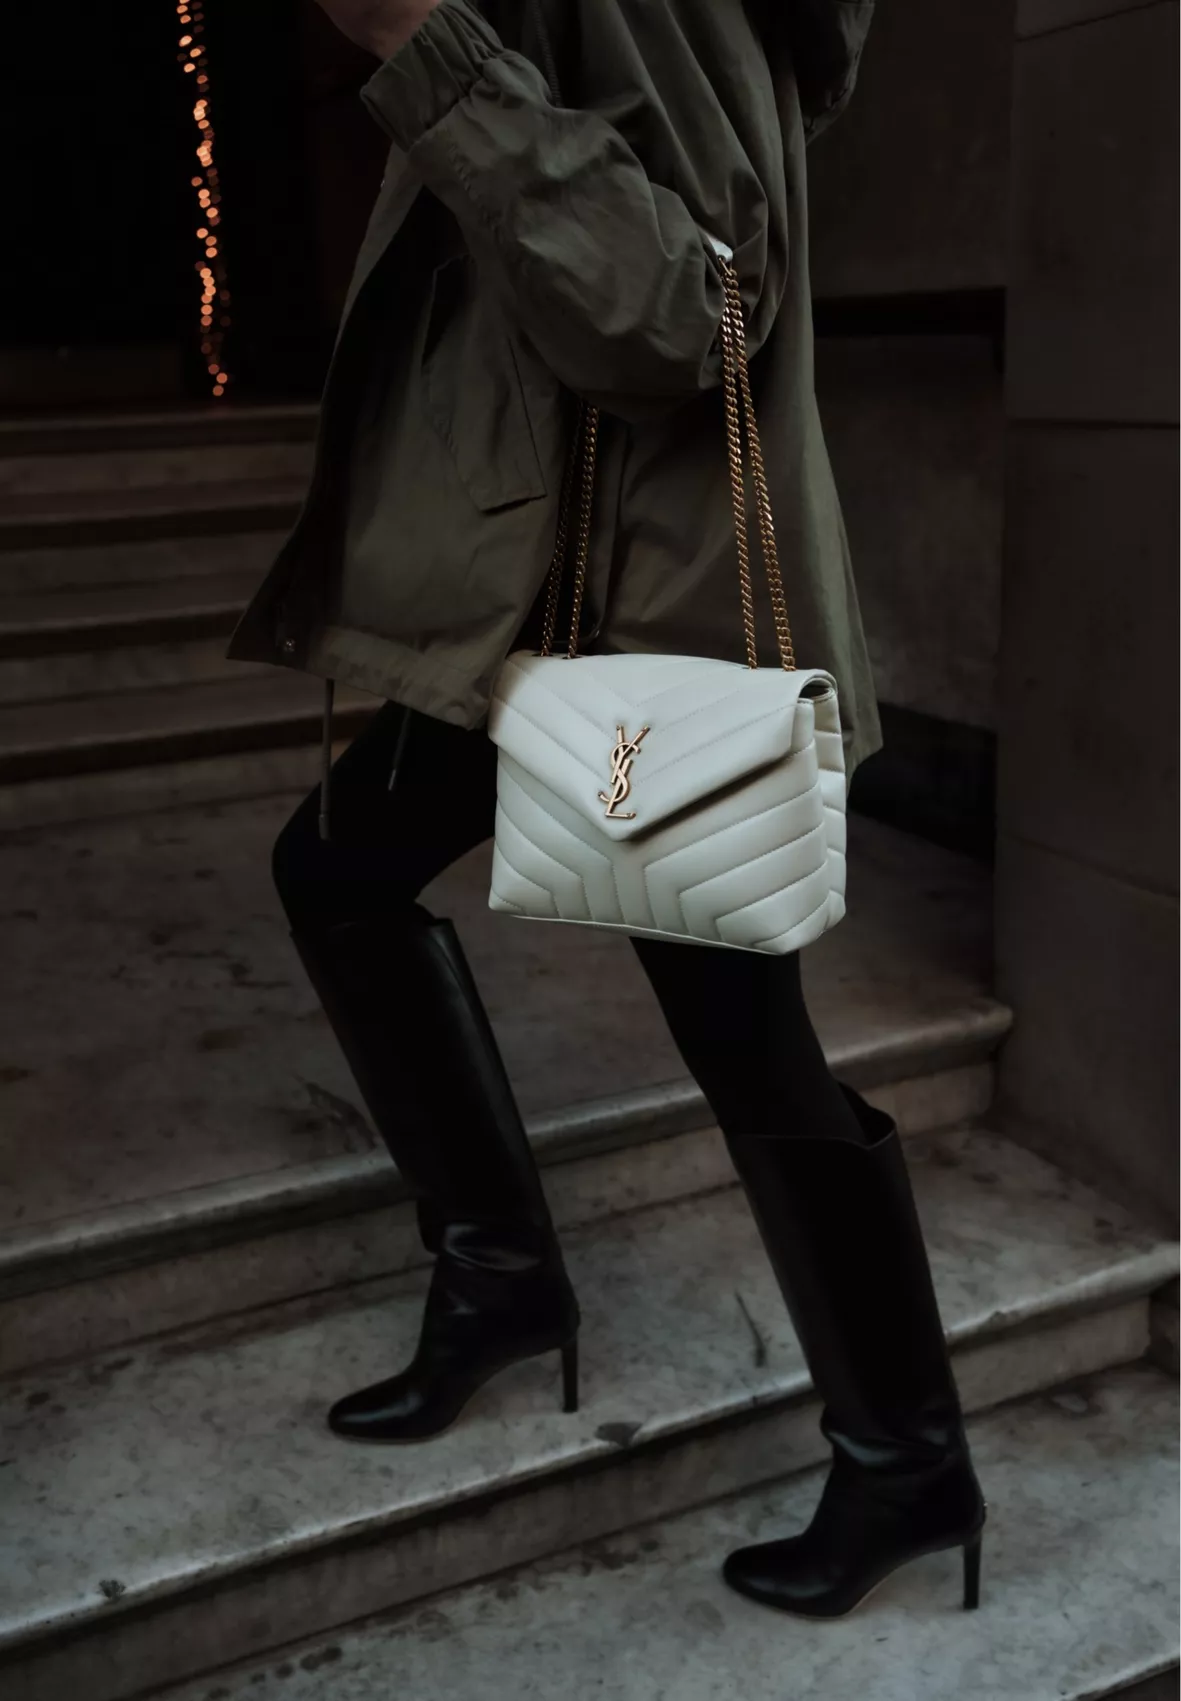 Small YSL Loulou Bag in Cinnamon Suede, The perfect fall outfit, Handbagholic in 2023